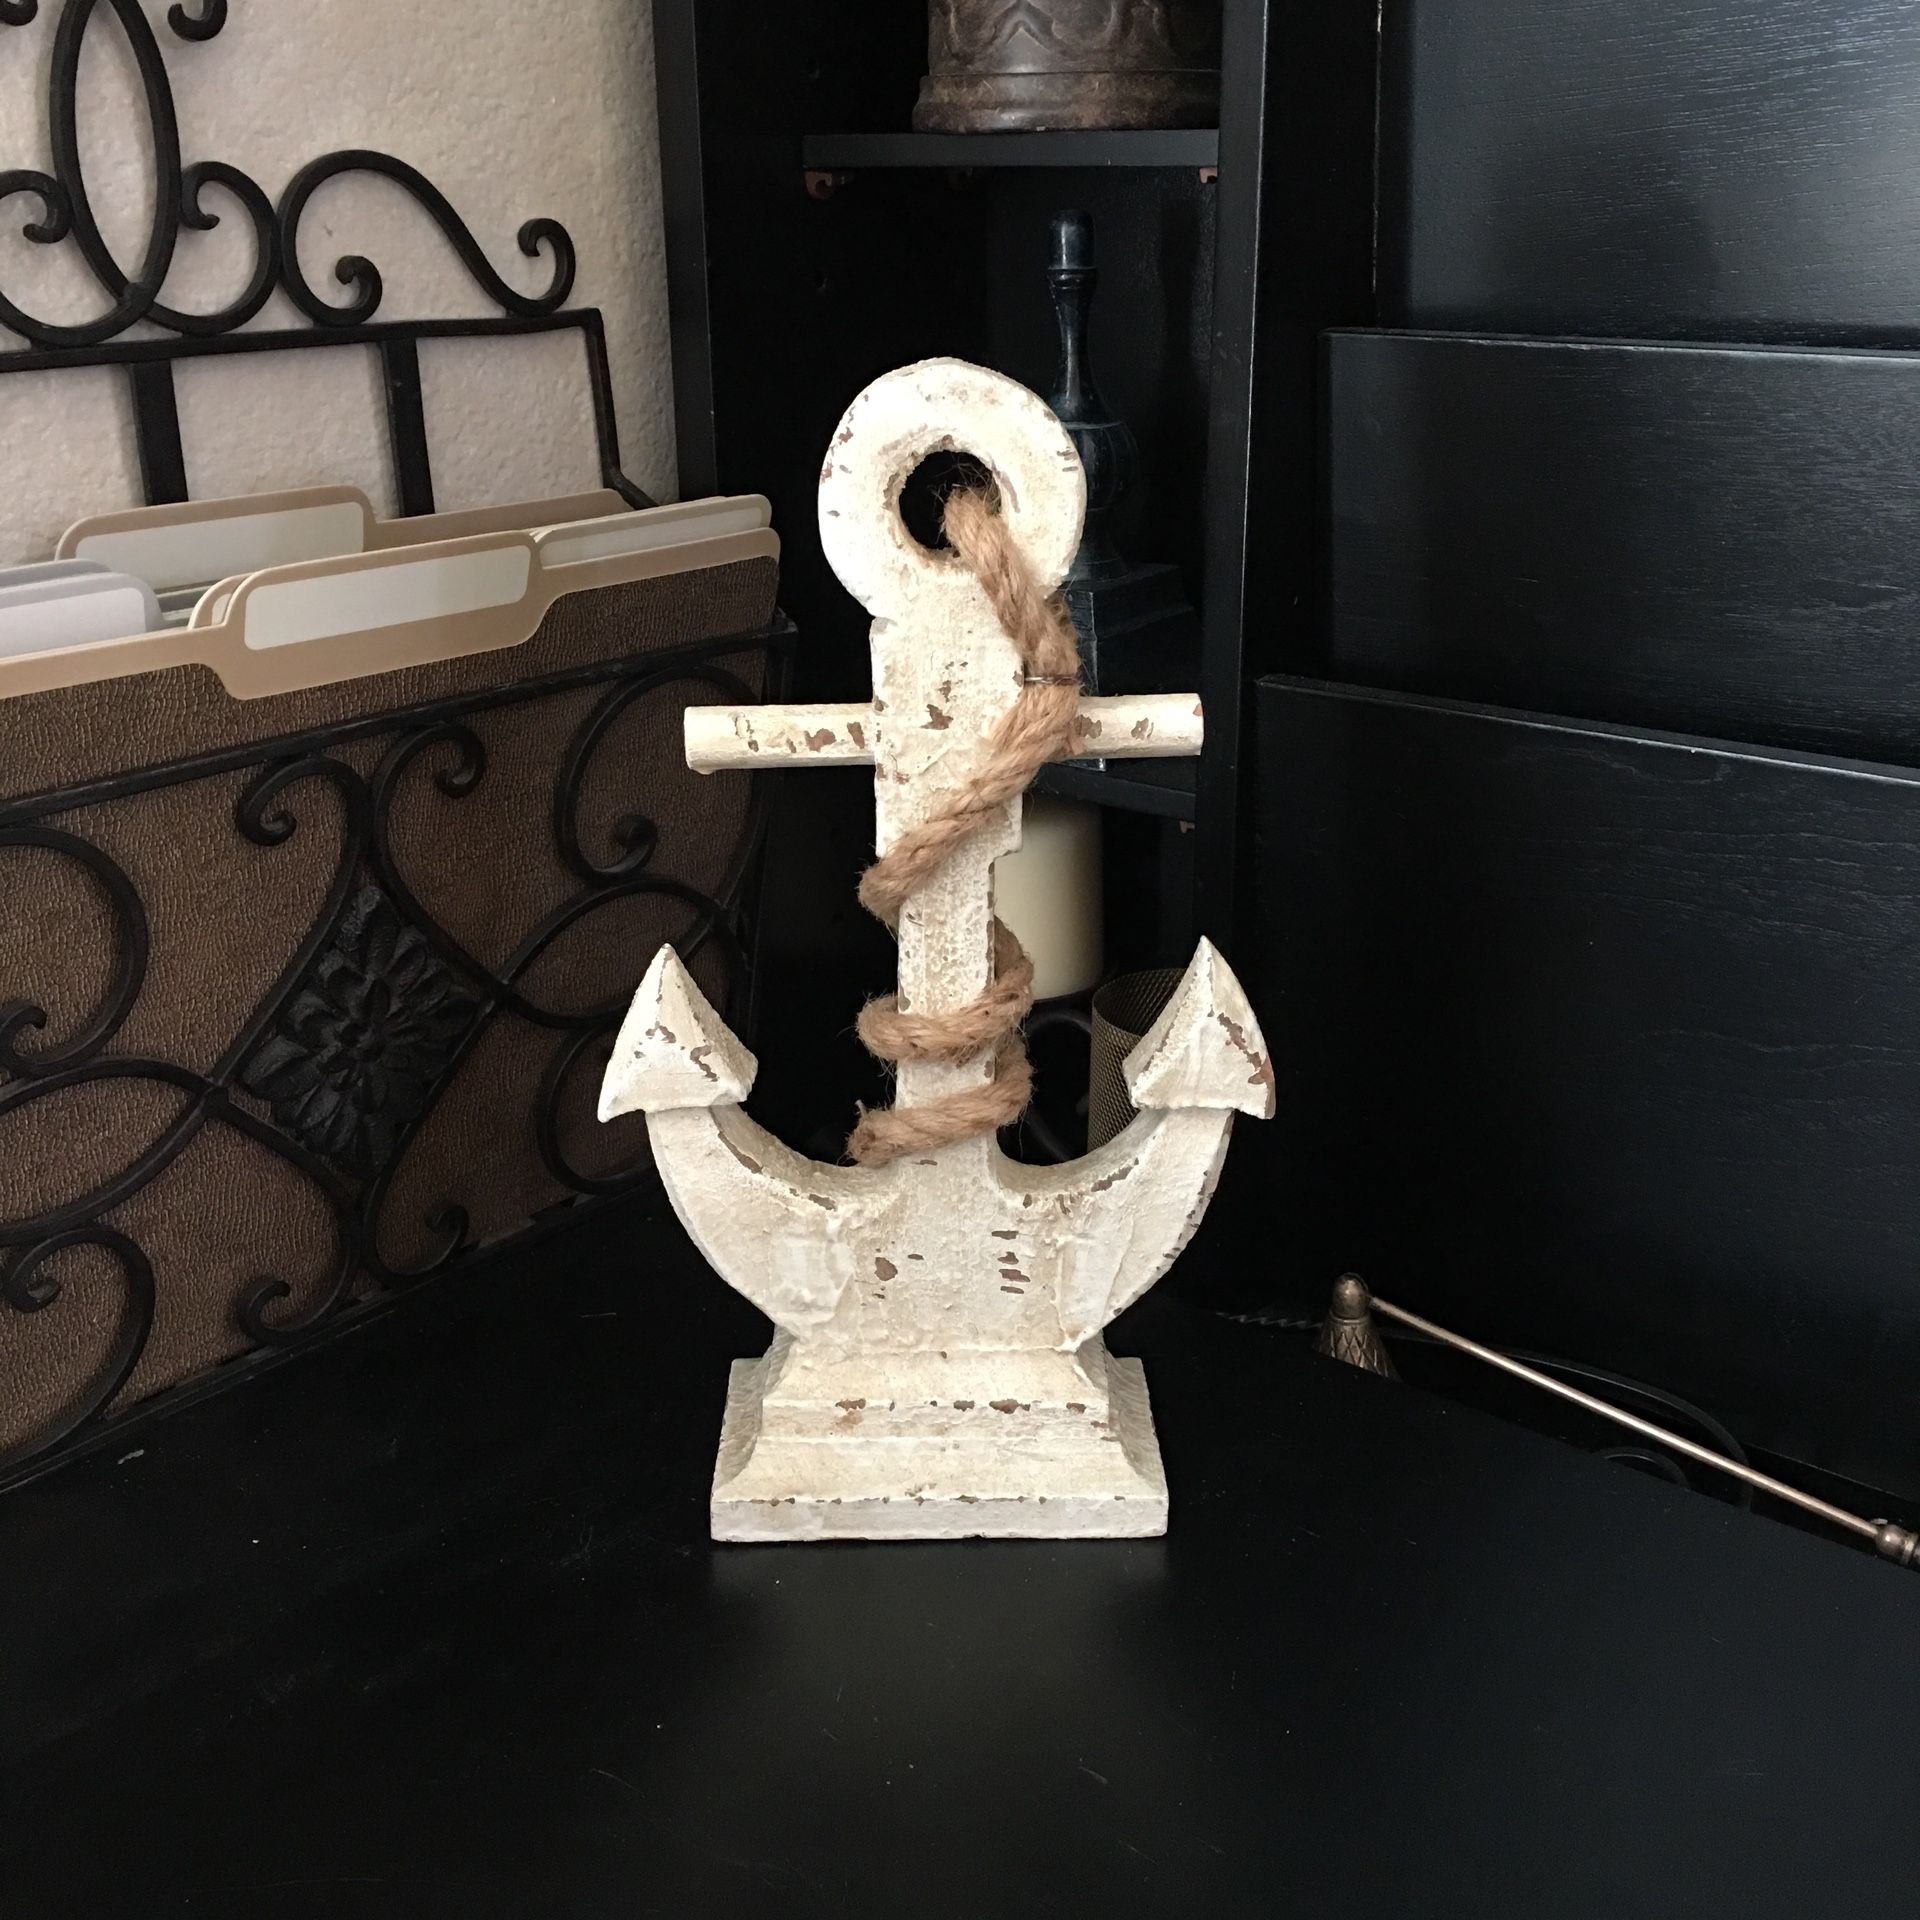 (30% off pick up) NAUTICAL 11.5”x6.5”x2.75” Lightweight Wood BOAT ANCHOR Rustic SHIP Table DECOR